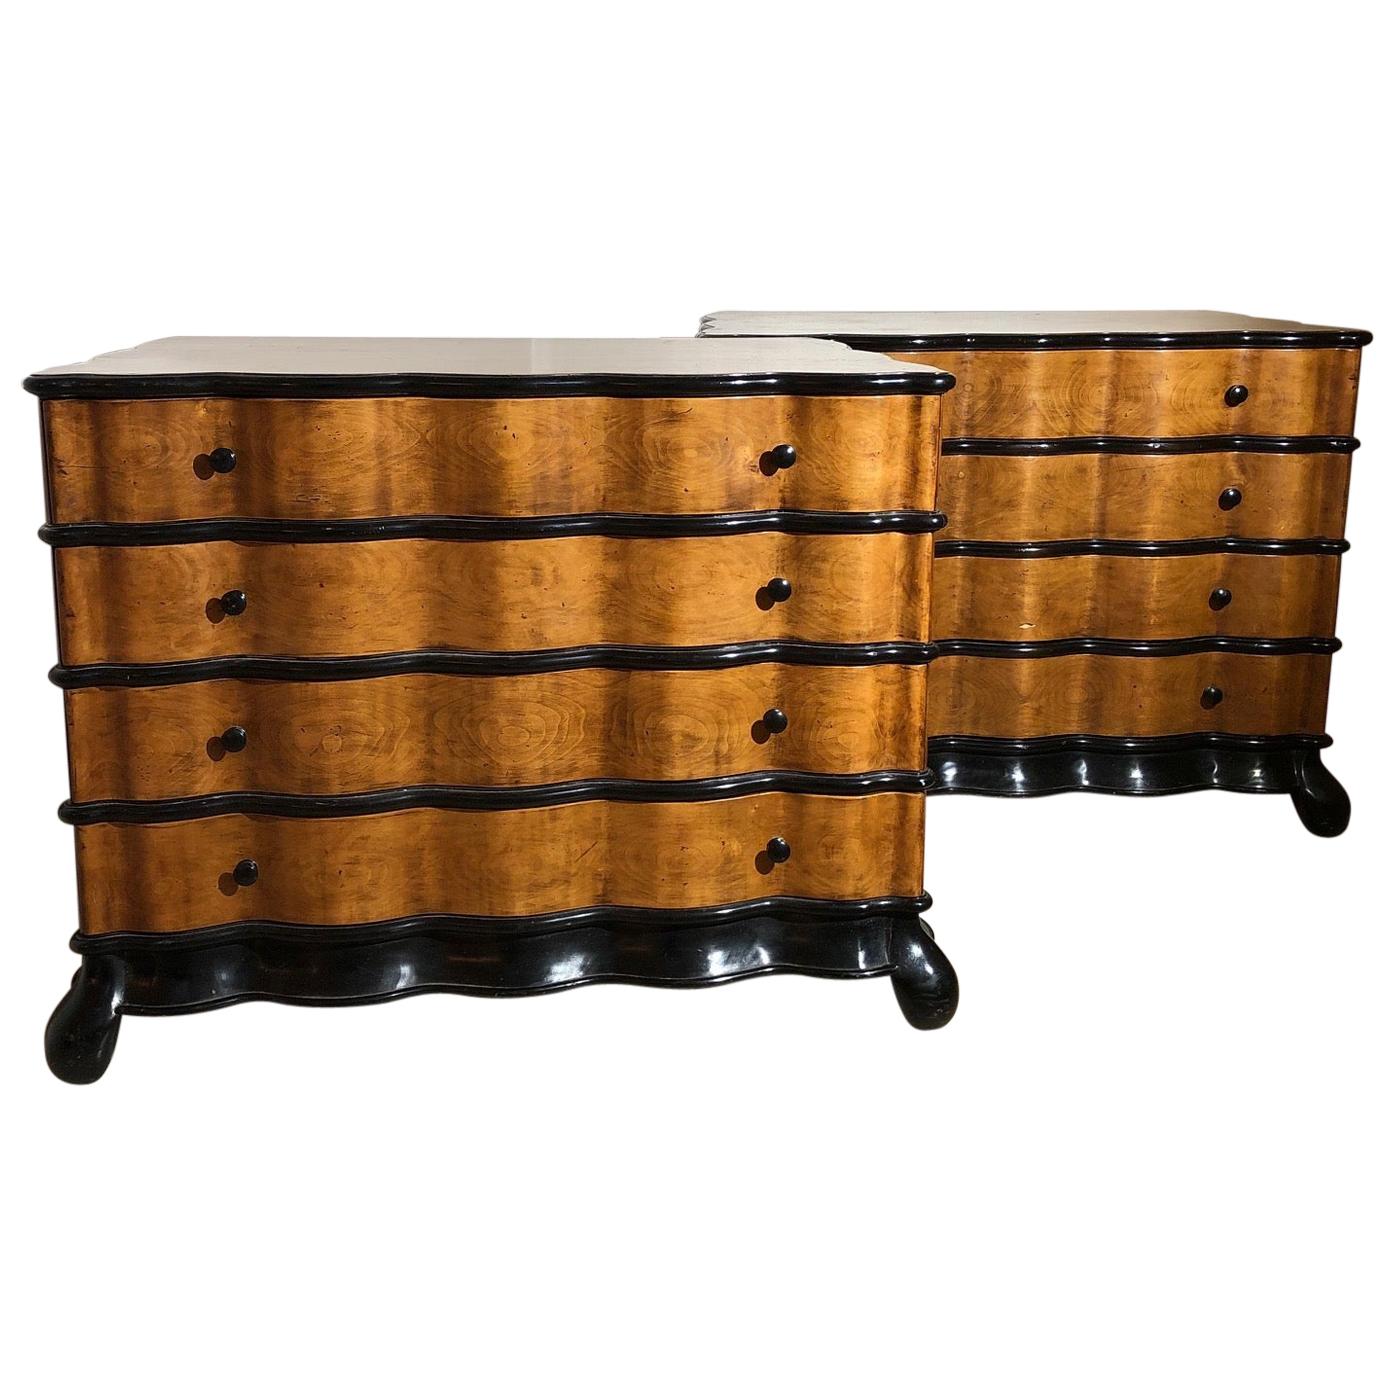 Palatial Pair of Walnut and Ebony Art Deco Bombe Commodes Chest of Drawers